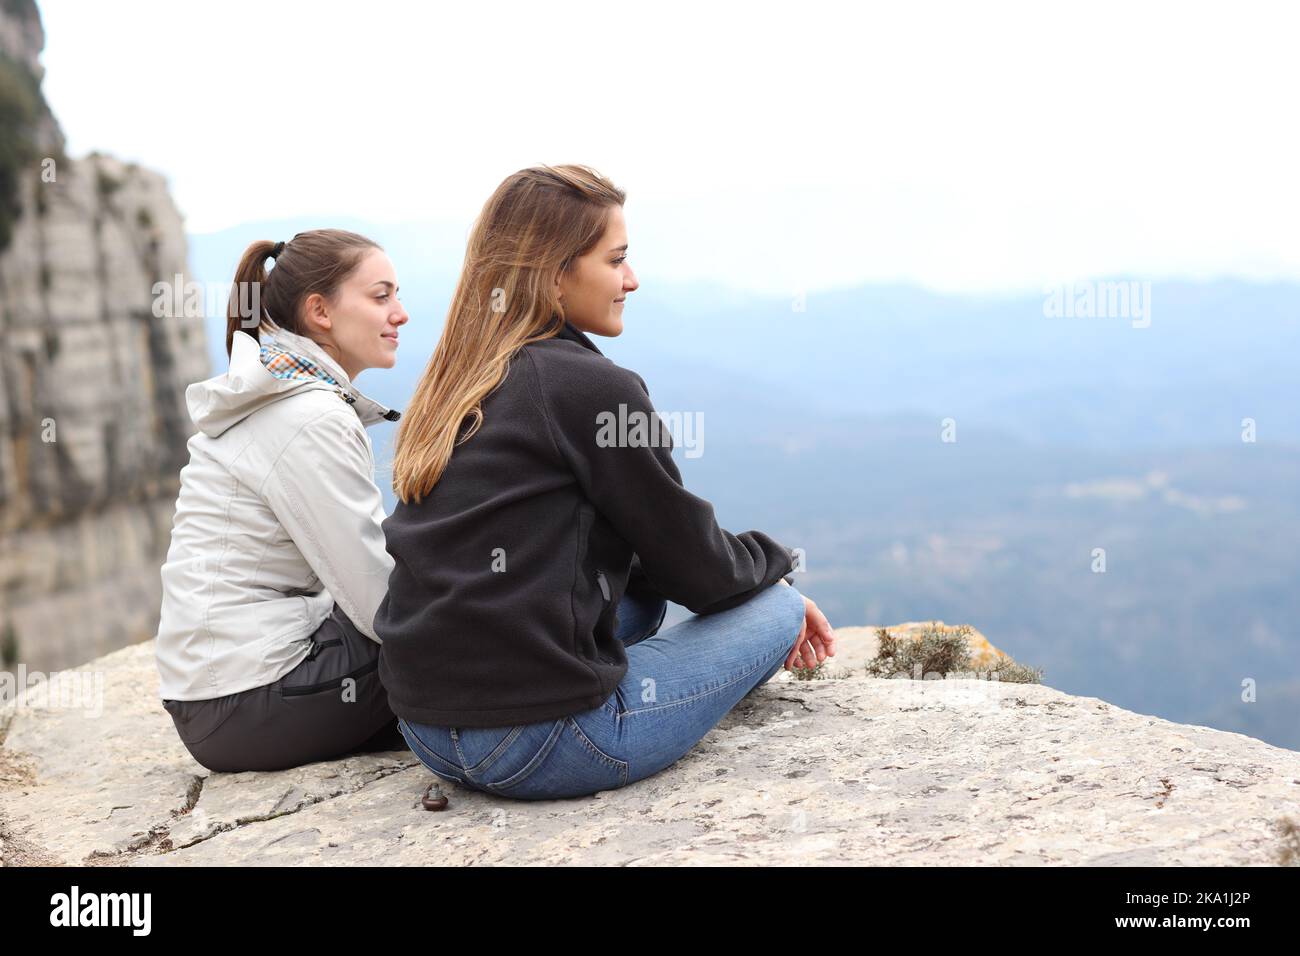 Two trekkers contemplating views sitting from cliff Stock Photo